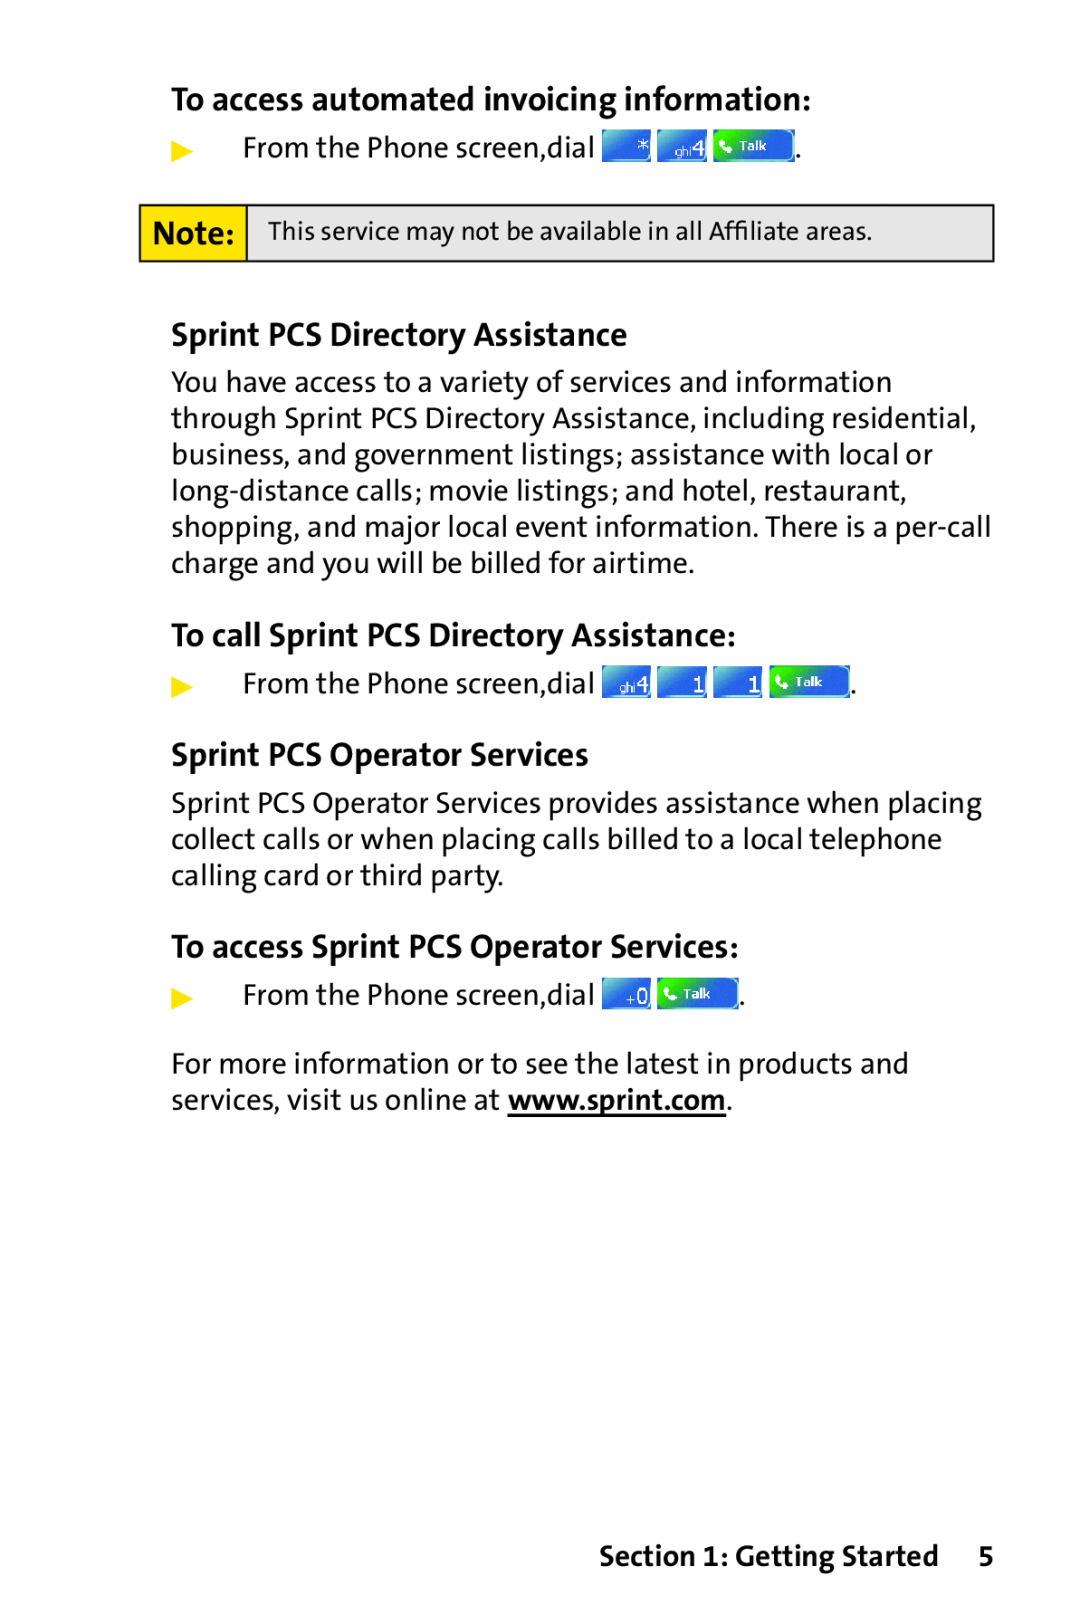 Sprint Nextel PPC-6700 manual To access automated invoicing information, Sprint PCS Directory Assistance, Getting Started 